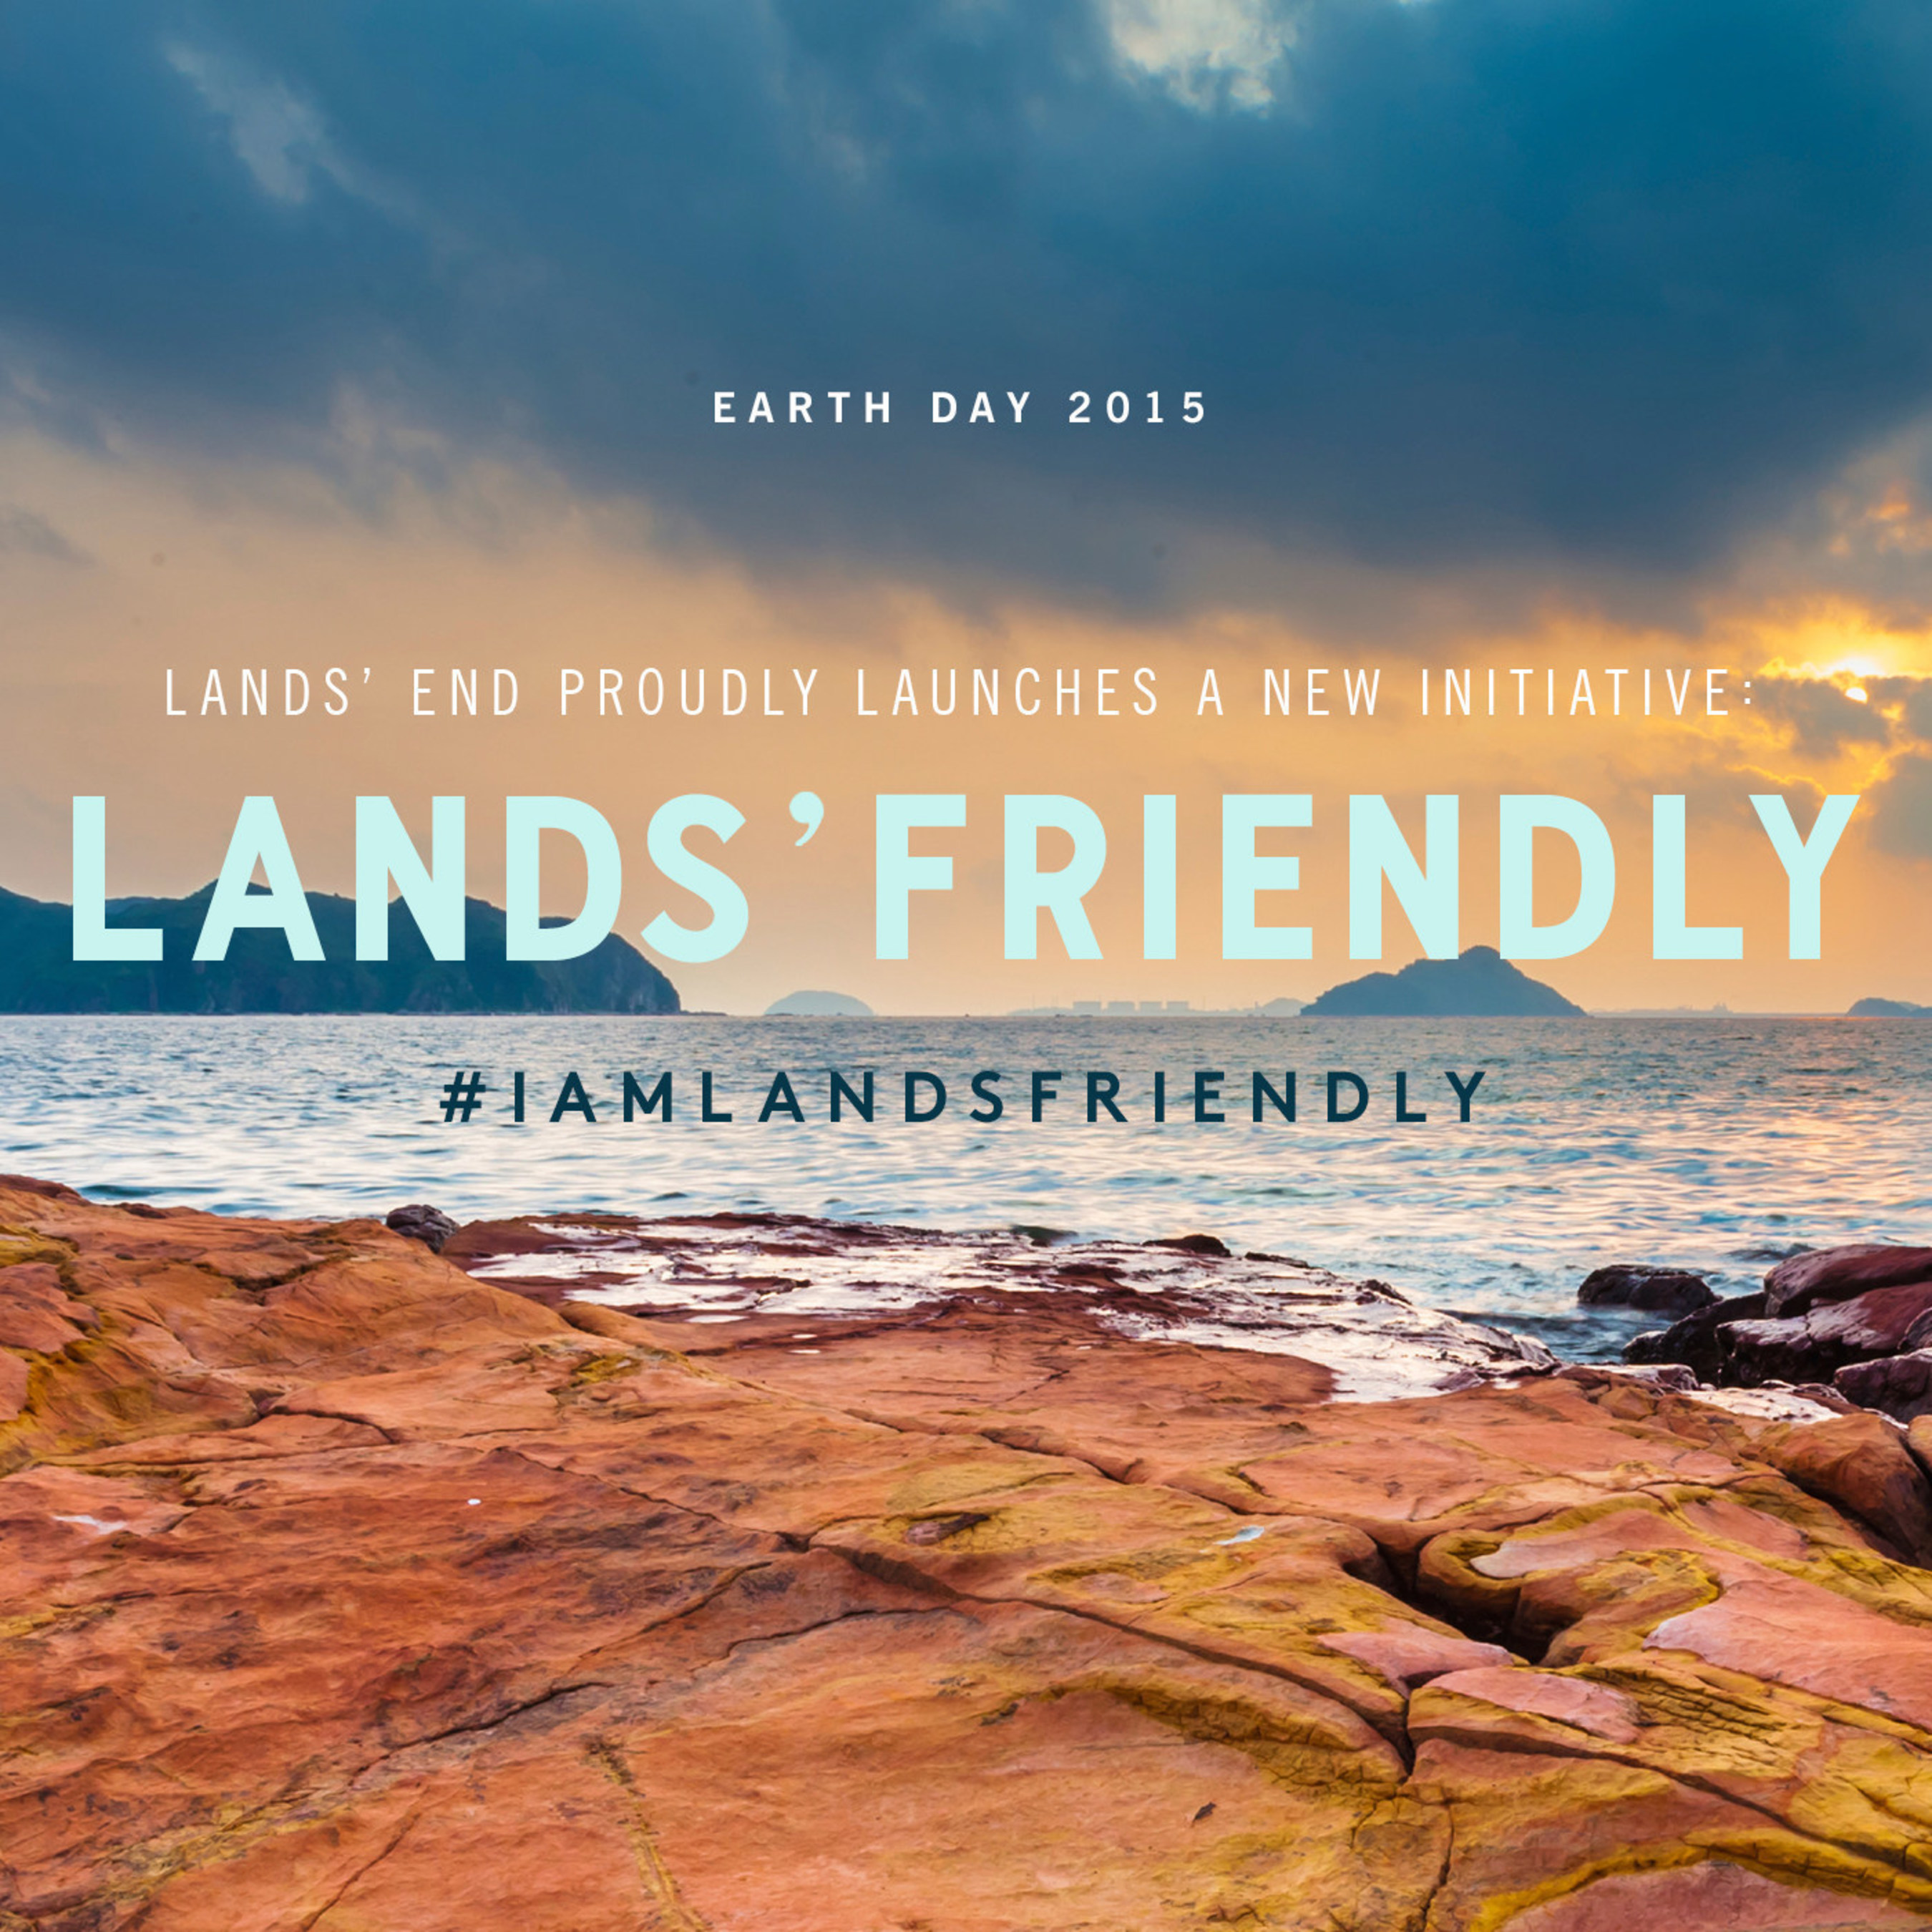 Happy Earth Day! We are proud to say #IAmLandsFriendly today and every day. By the end of 2015, expanding our partnership  with the National Forest Foundation, we will have planted our 1,000,000th tree! Post your Earth Day pic and tag it #IAmLandsFriendly for your chance to win a tree planting kit of your own!